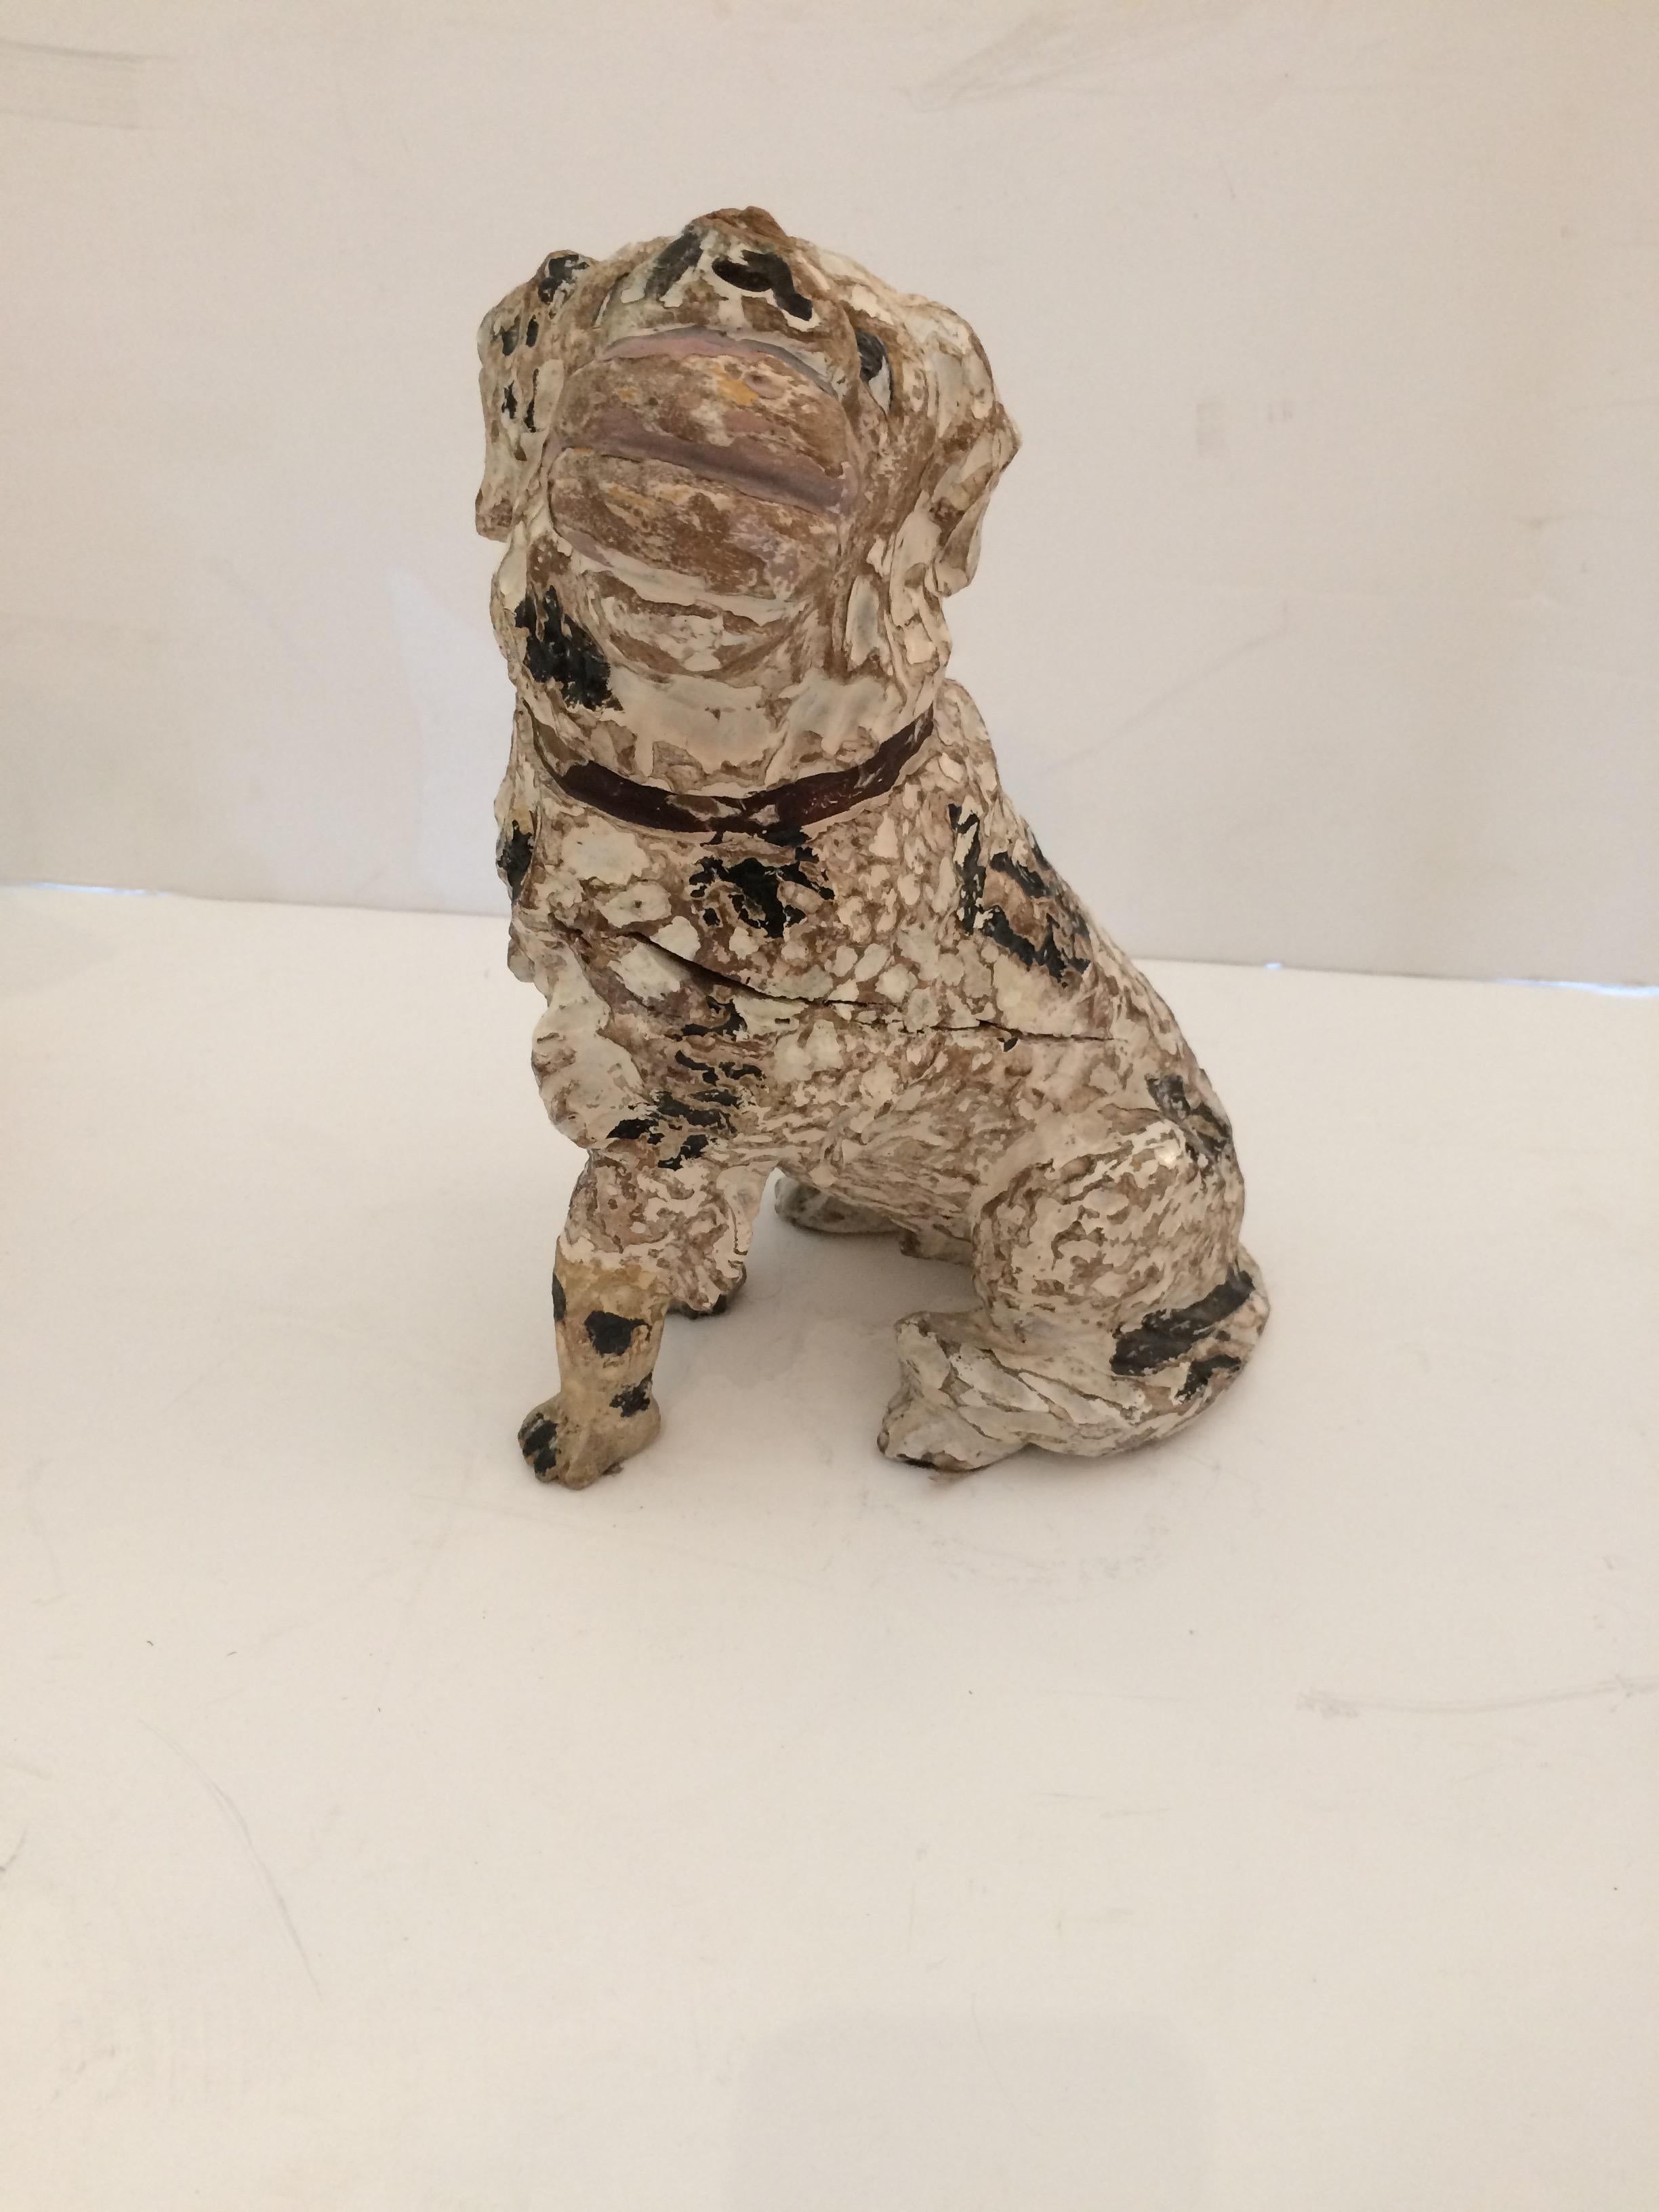 An adorable vintage carved wood dog originally from a French bakery display, roughly hewn and wonderfully rustic with a cute expression and ball in its mouth.